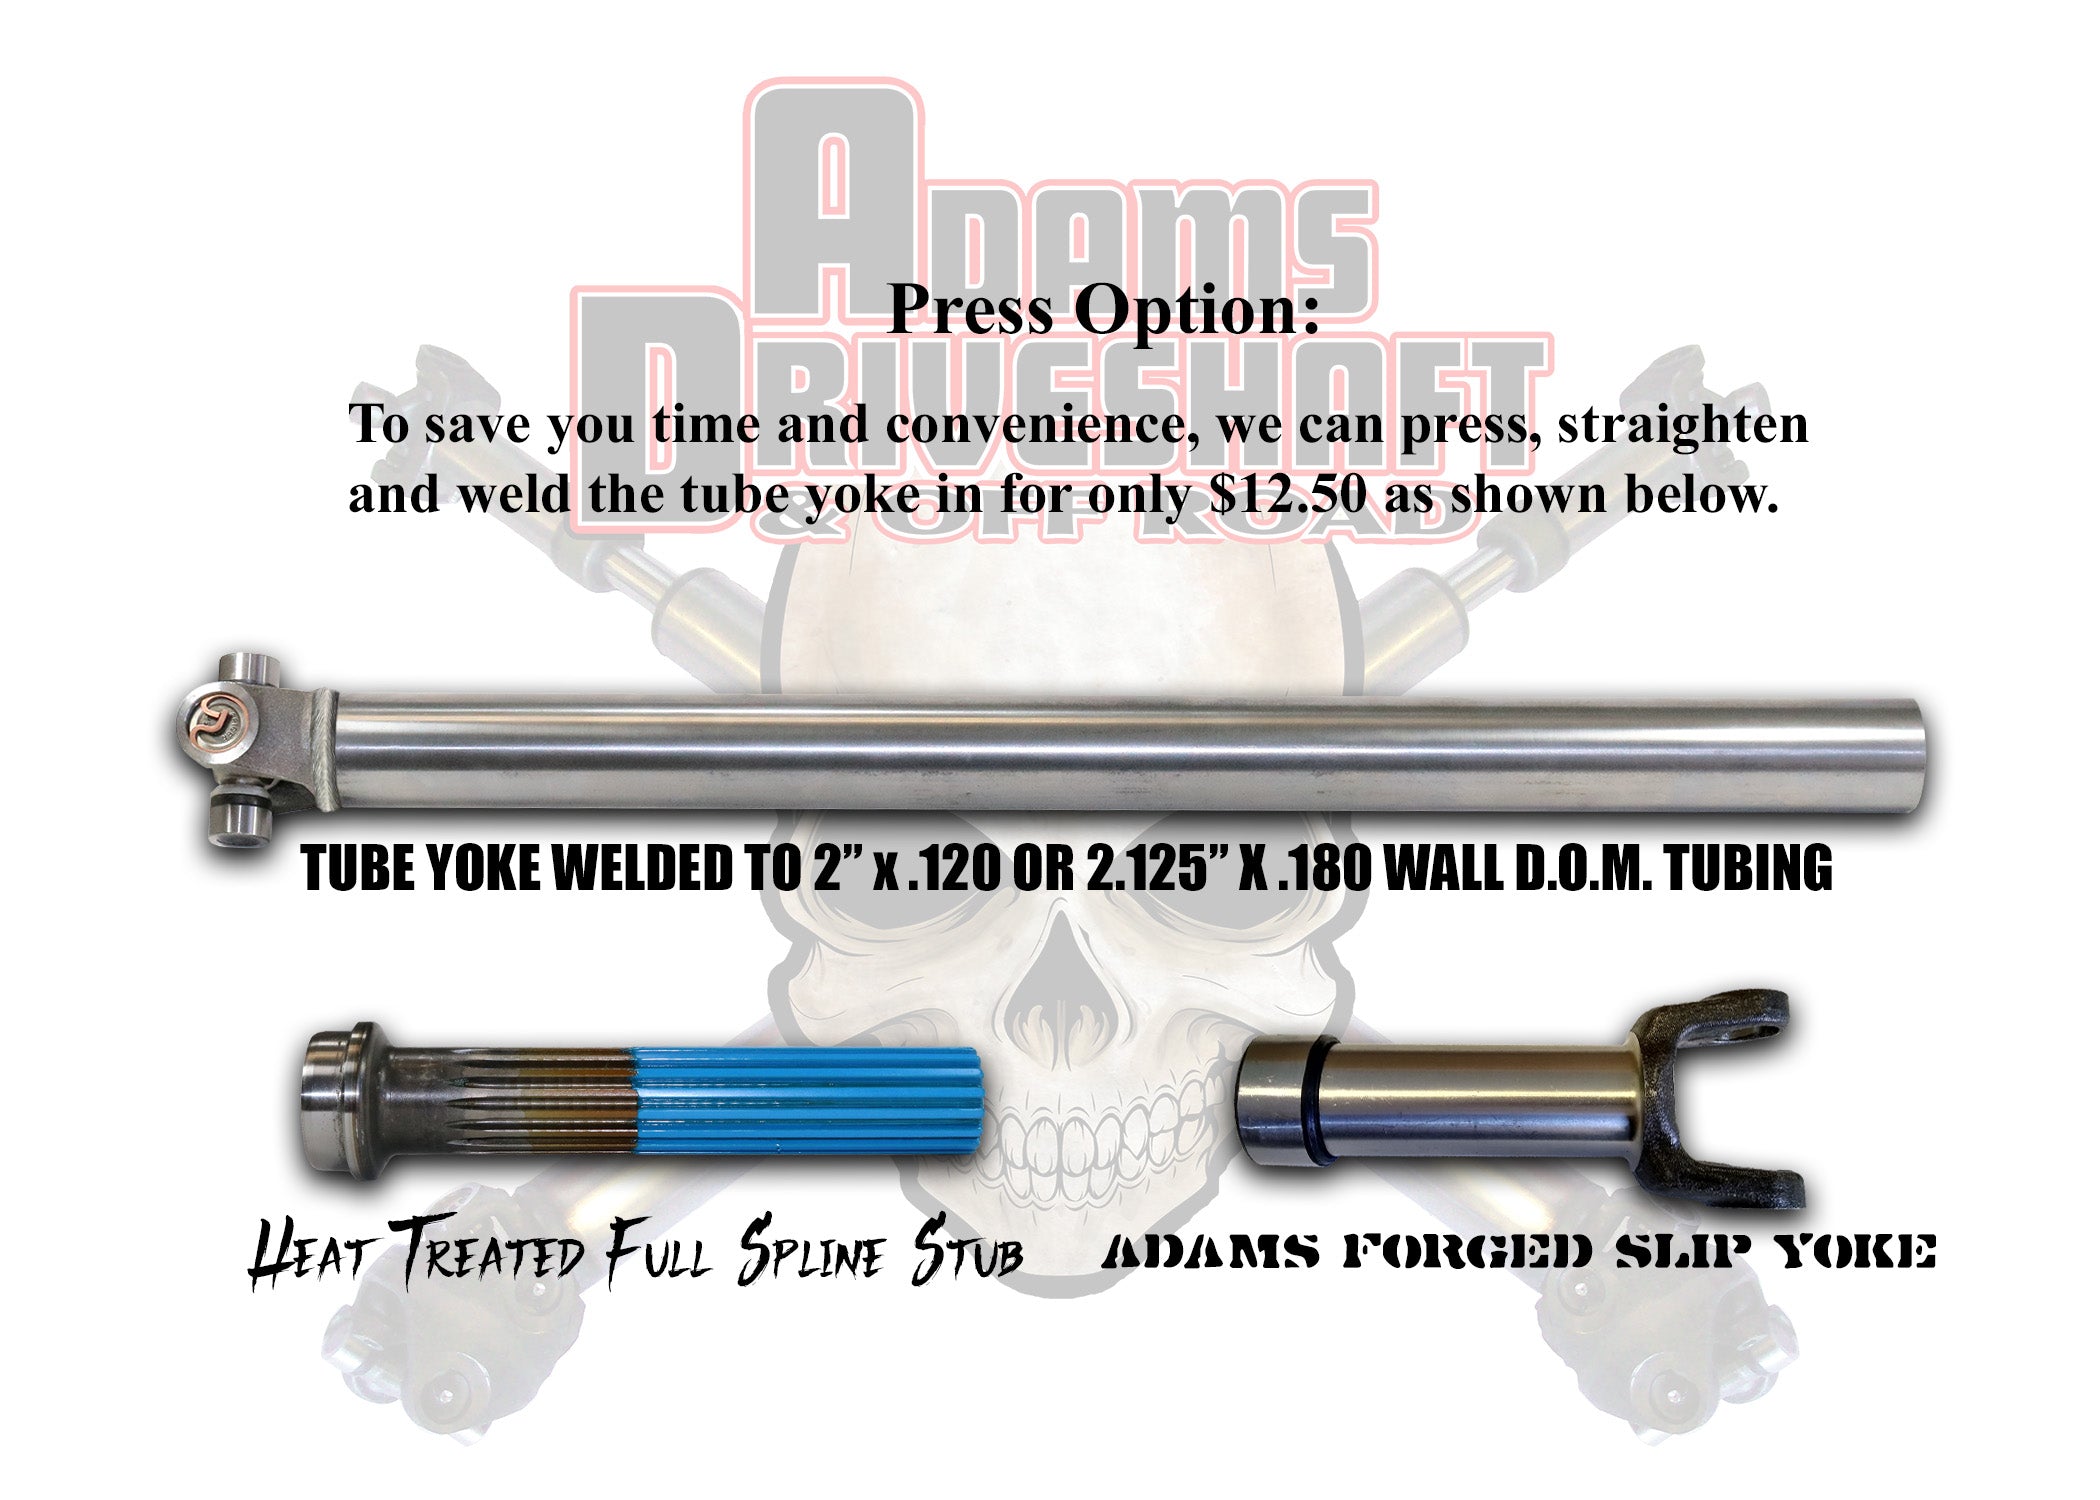 Adams Driveshaft's Build your Own - DIY - Offroad Buggy, Jeep Driveshaft, Etc. in 1310 Series